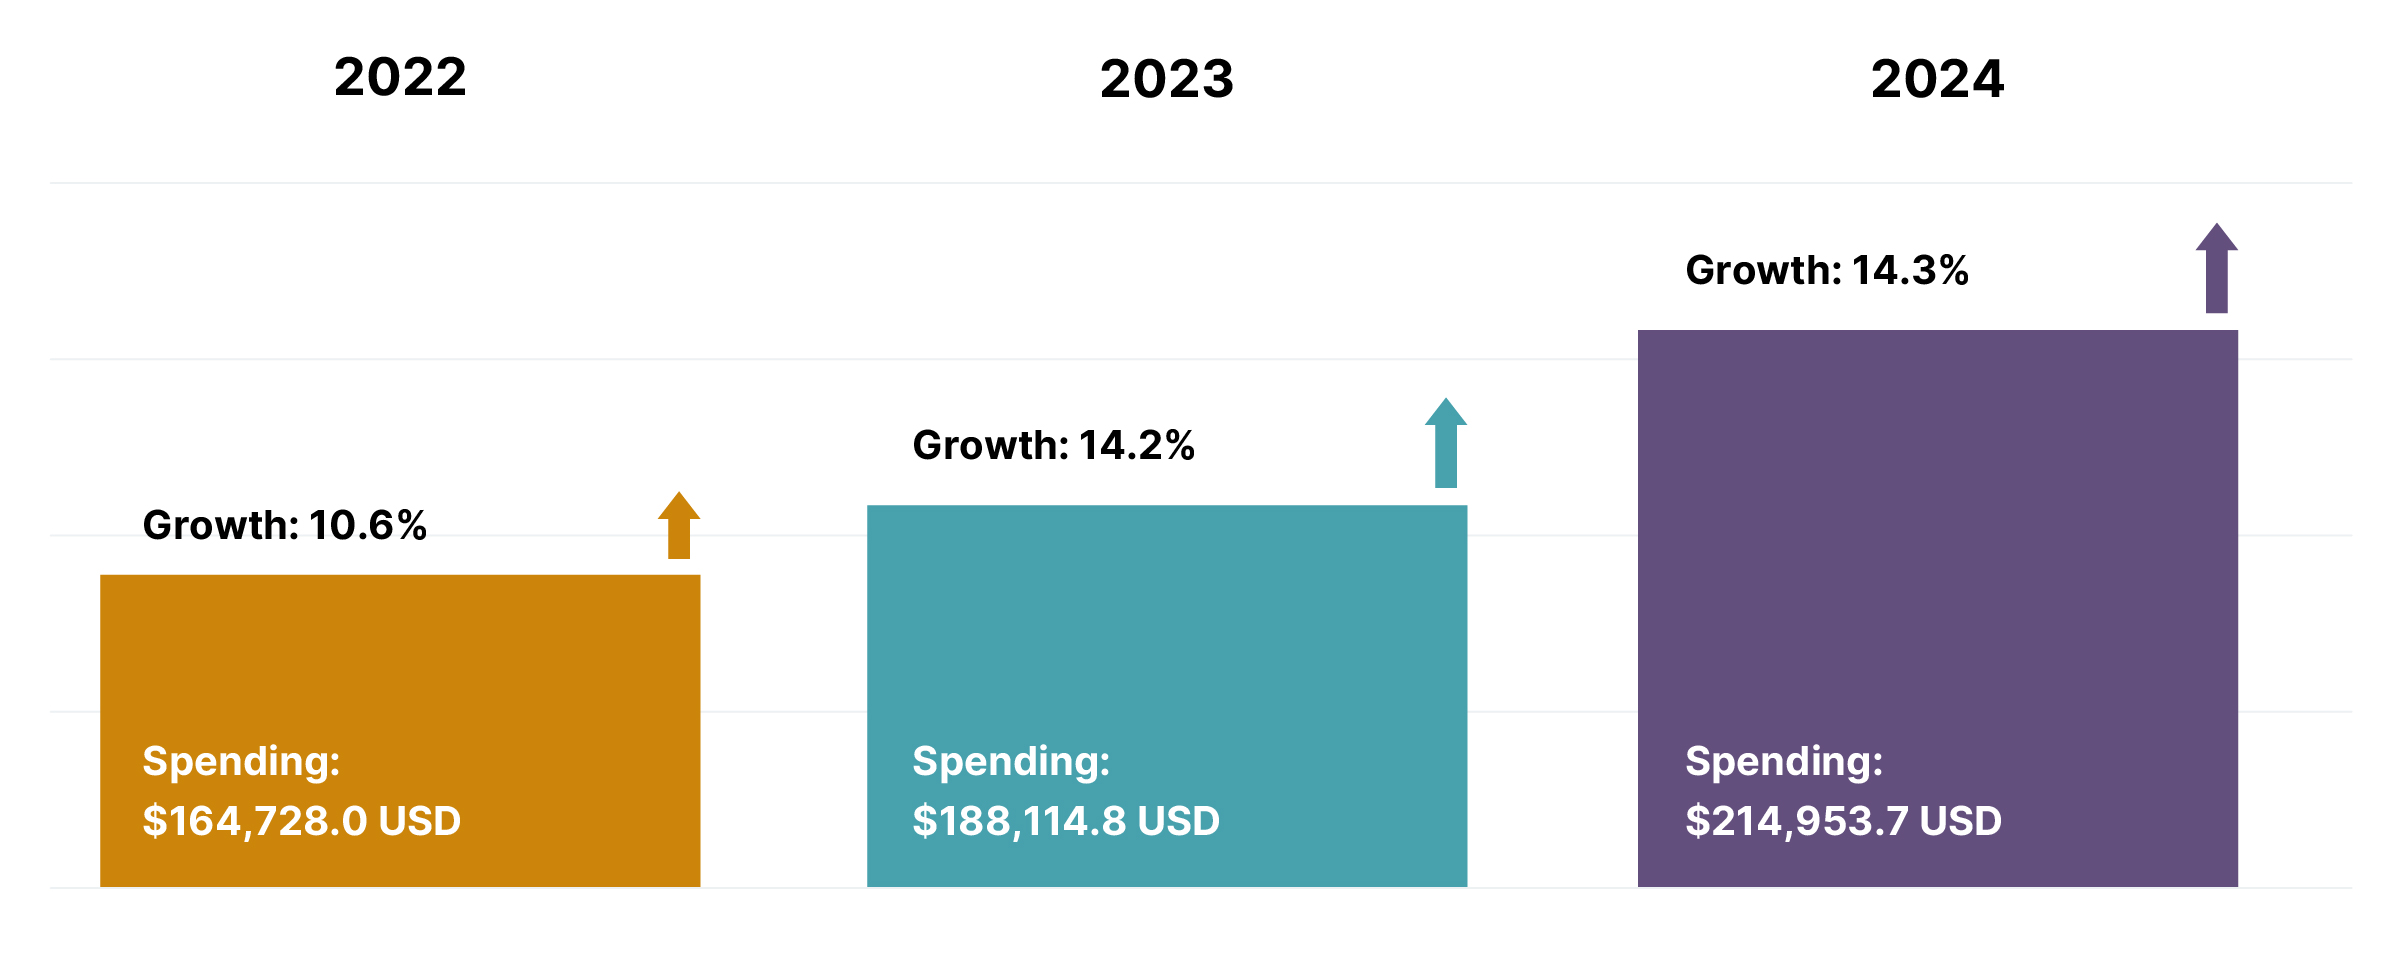 A vertical bar chart showing worldwide USD investment in security and risk management end-user spending from 2022 to 2024. 2022 shows $164,728.0 spending, with growth of 10.6%. 2023 shows $188,114.8 spending, with growth of 14.2%. 2024 shows $214,953.7 spending, with growth of 14.3%.